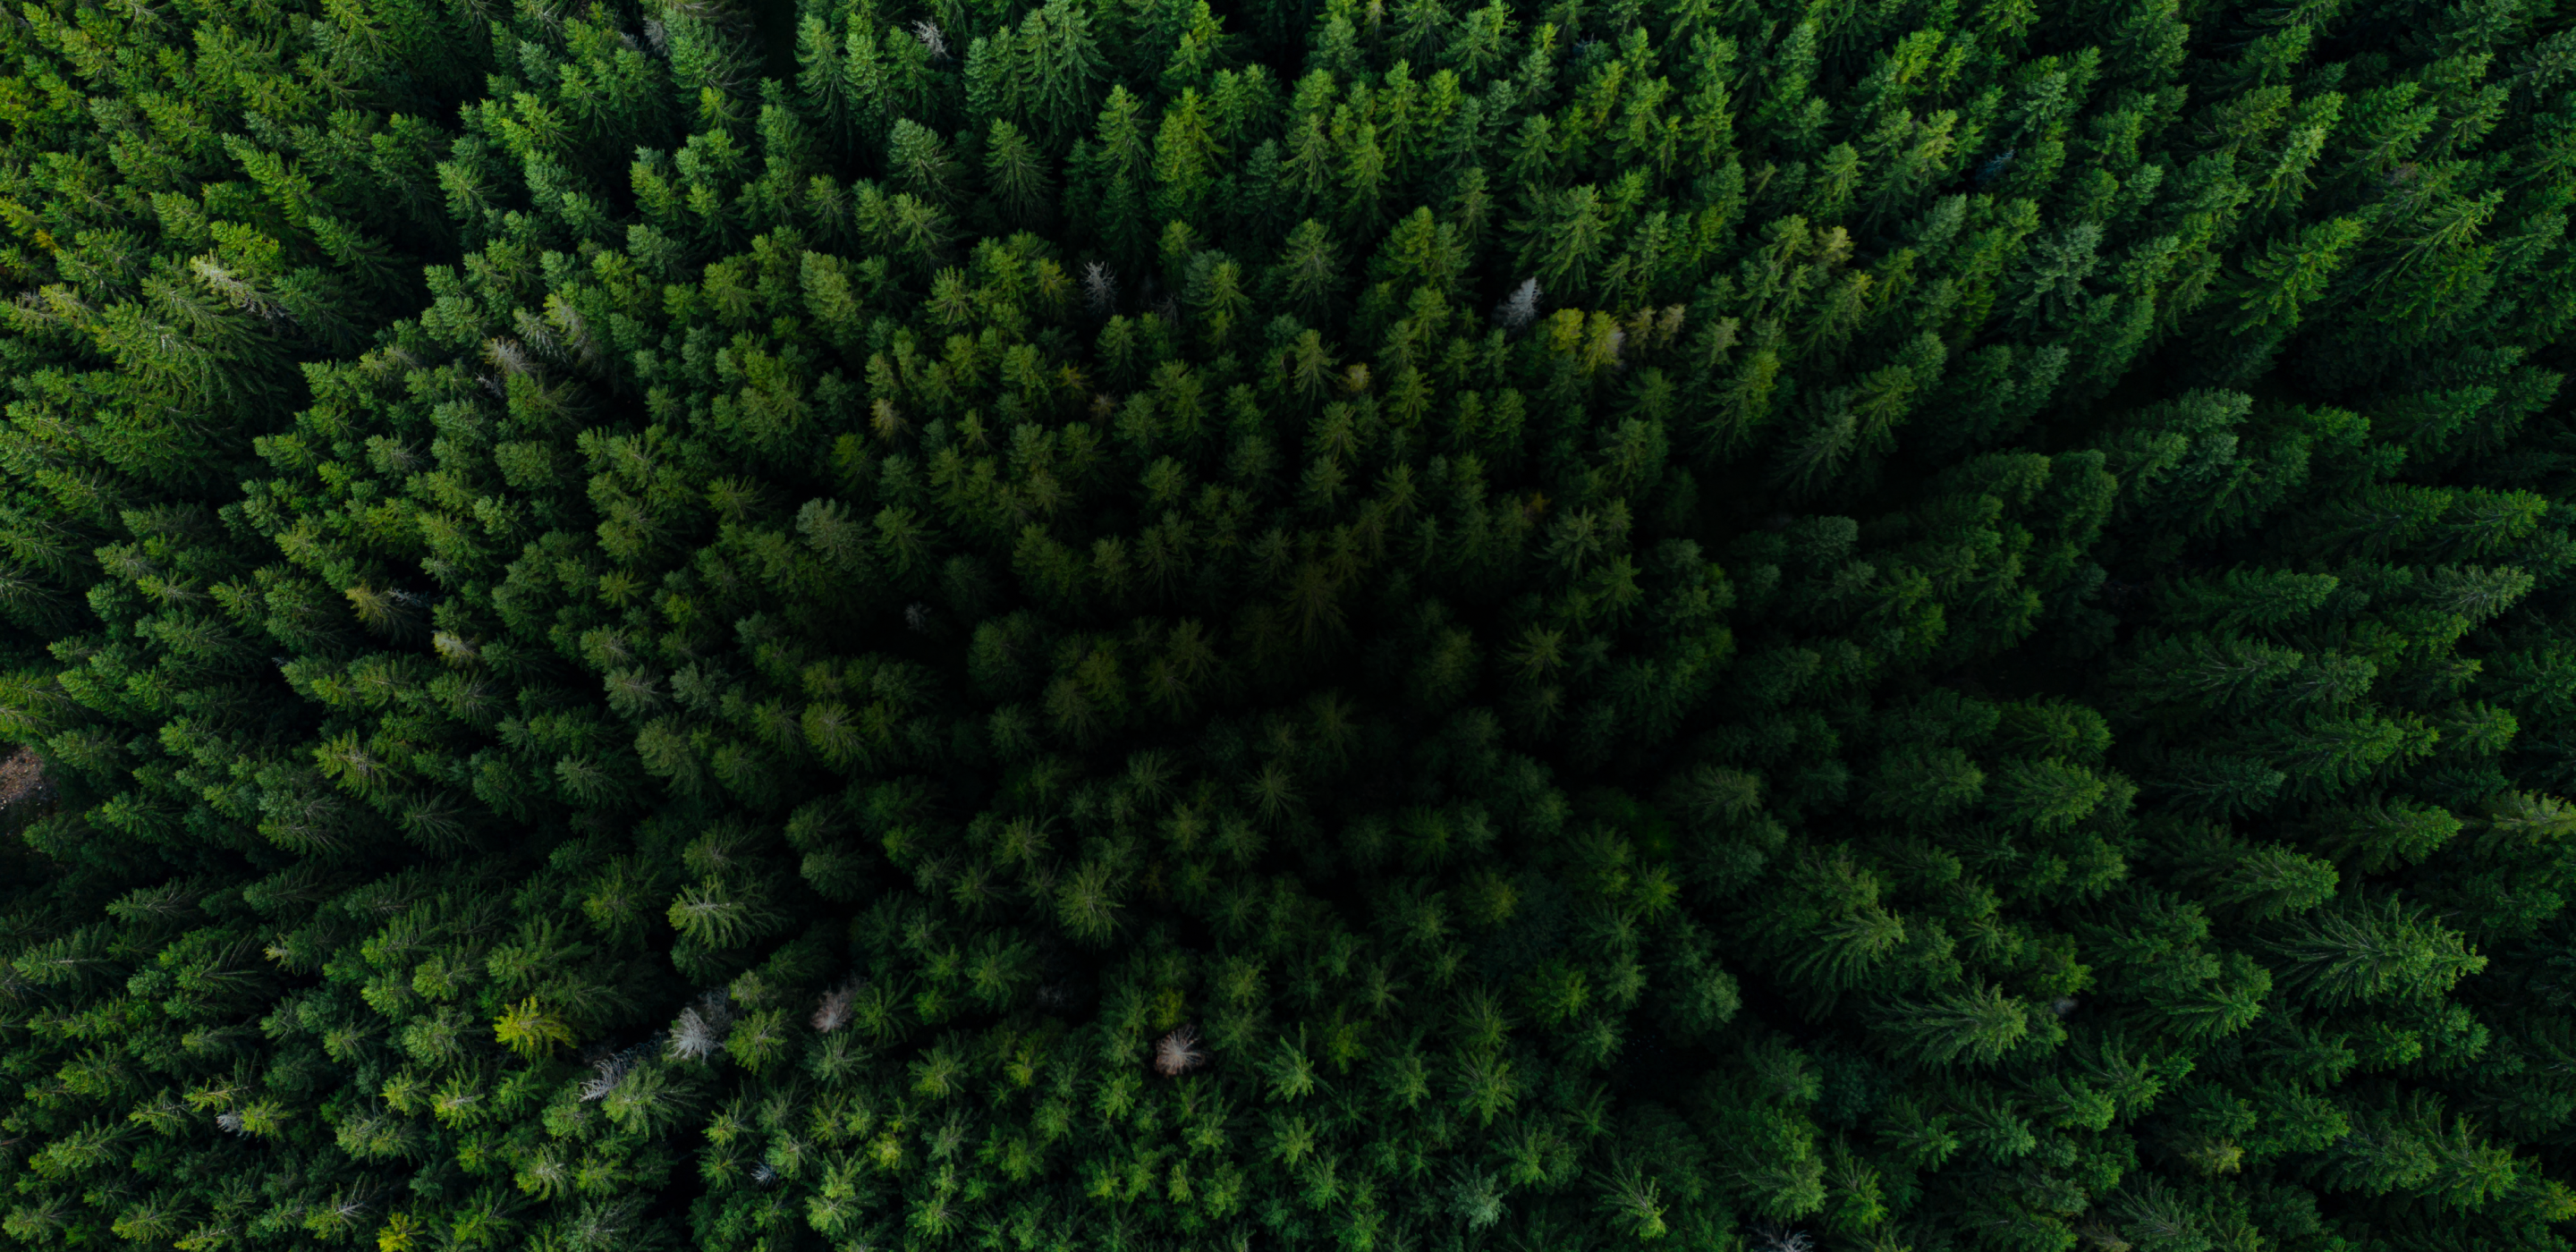 A birds eye view of a forest.